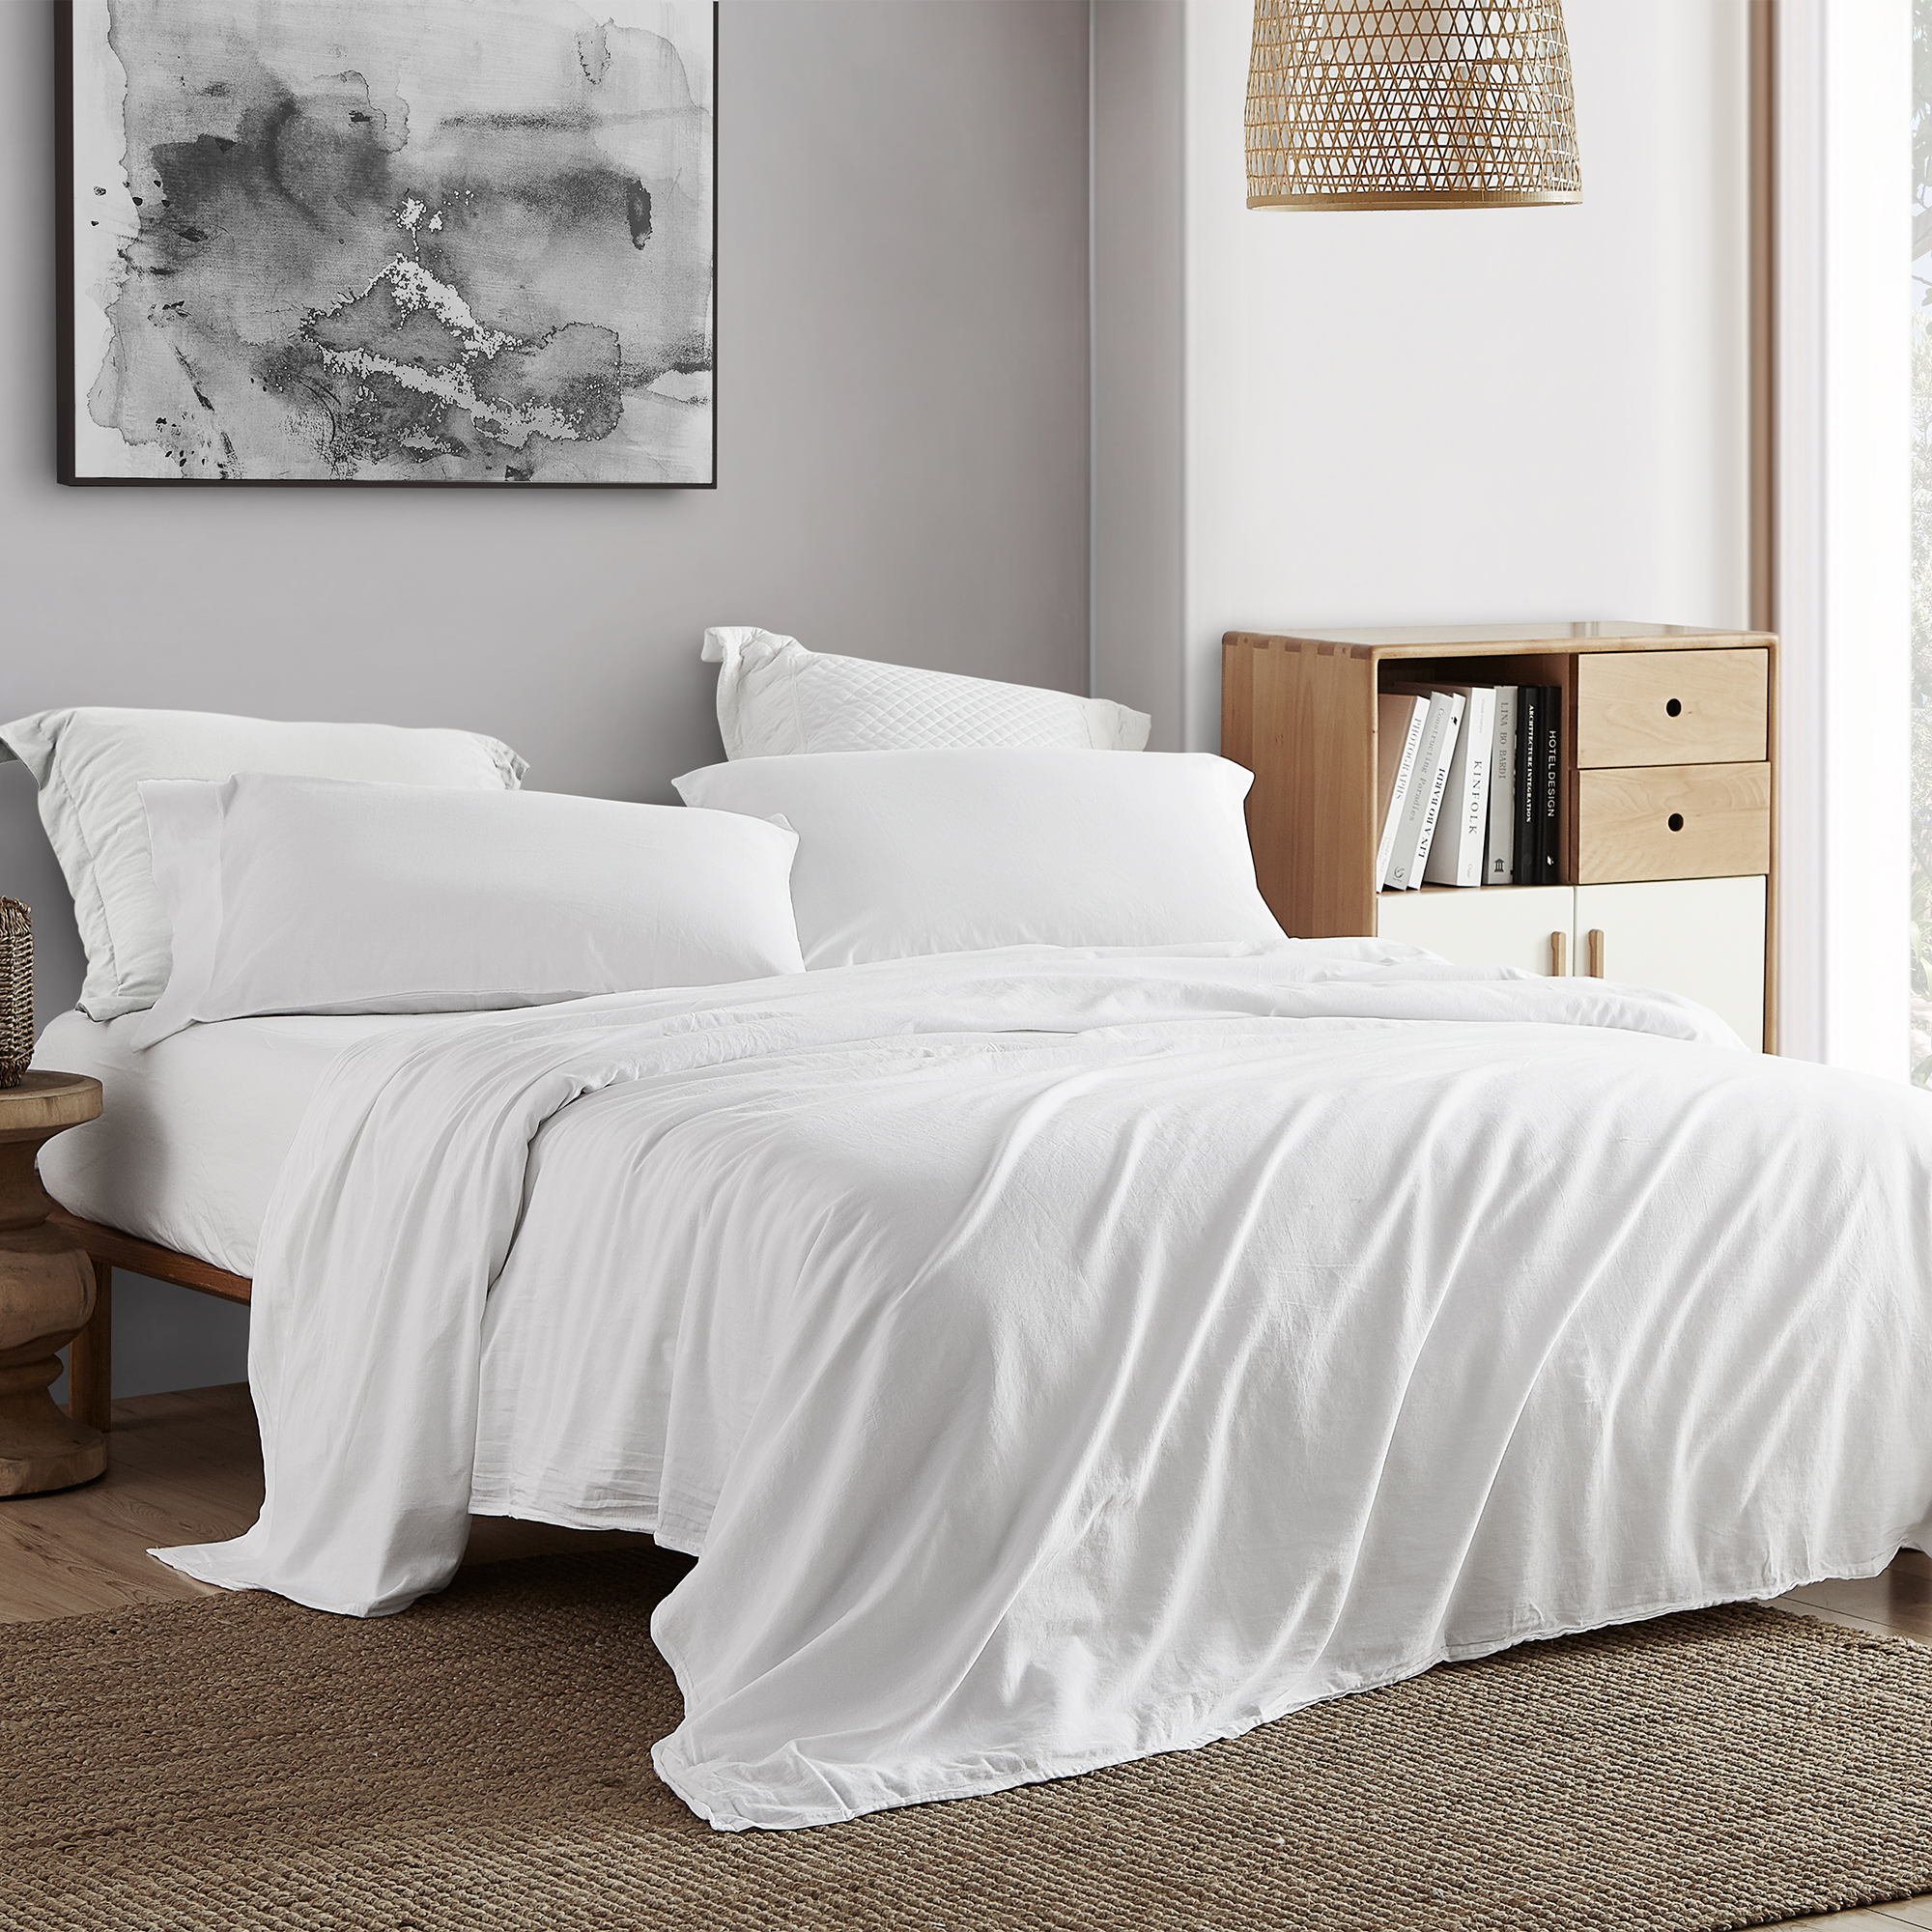 300TC Saudade Portugal Queen Sheet Set - Washed Sateen